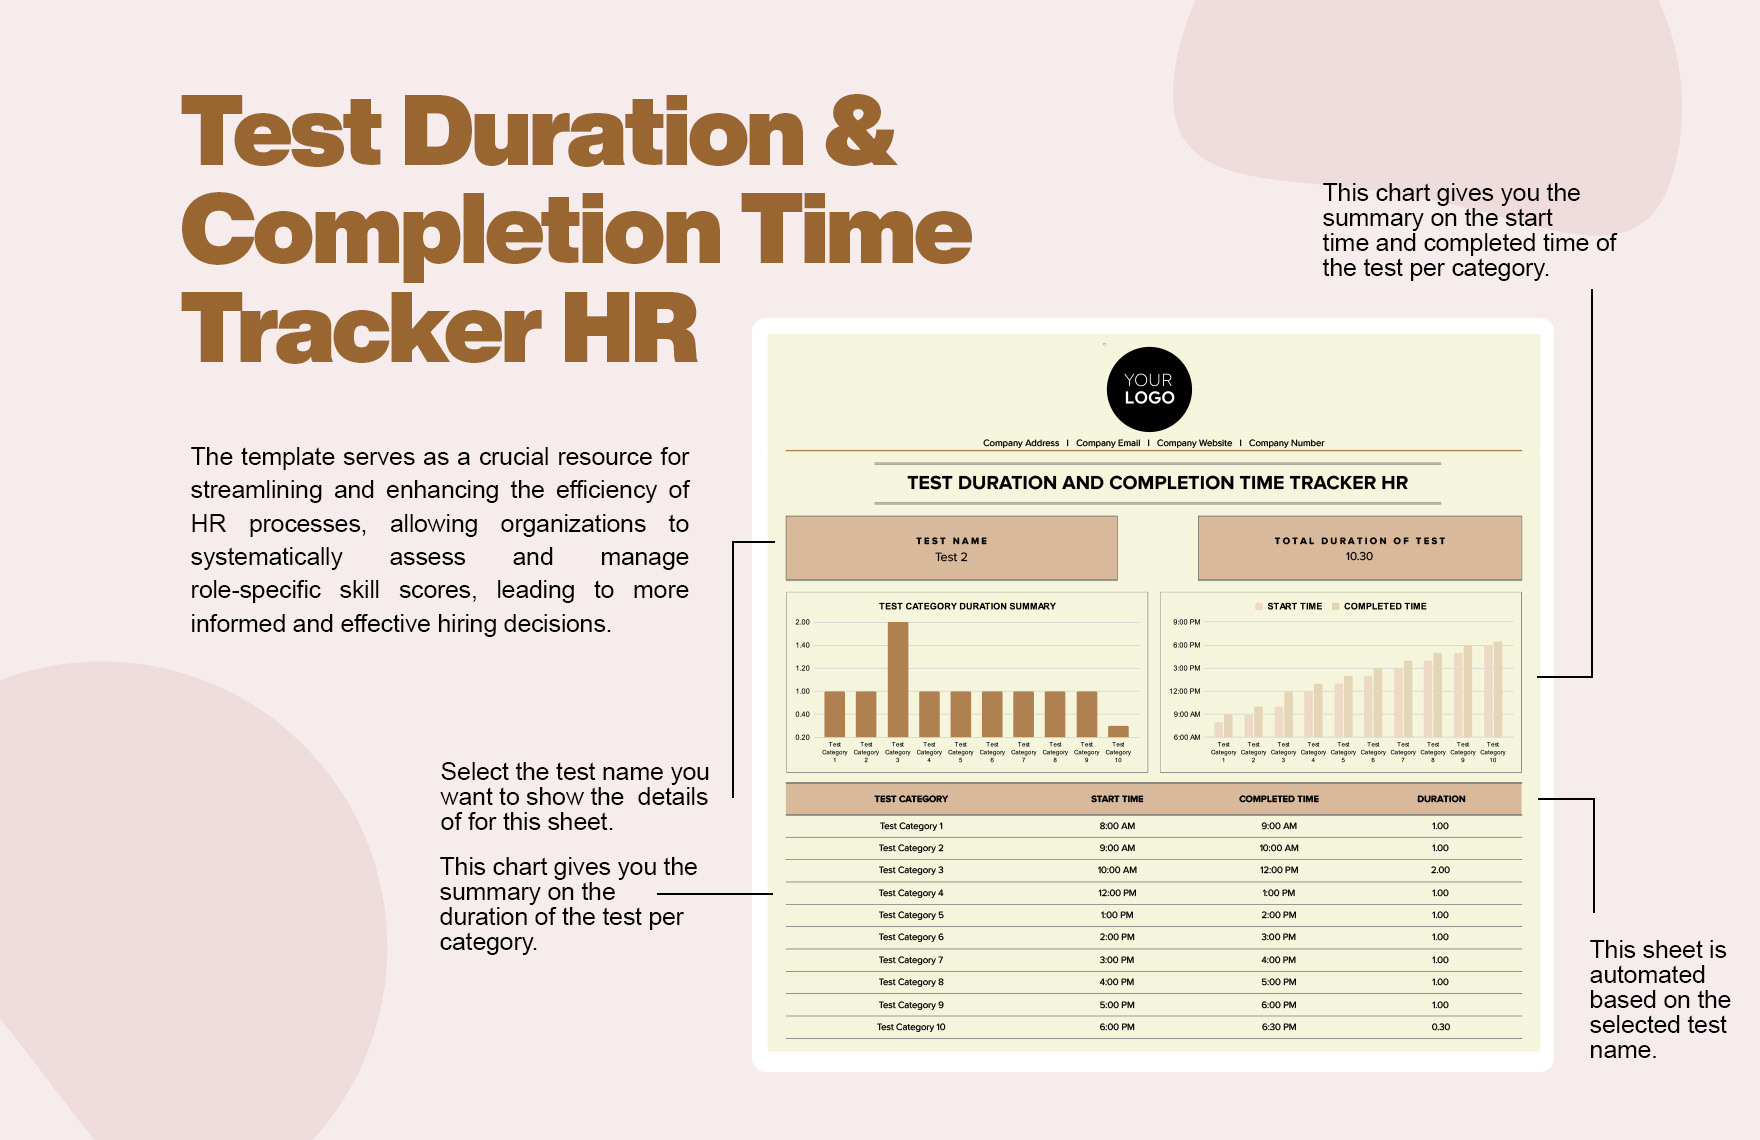 Test Duration and Completion Time Tracker HR Template